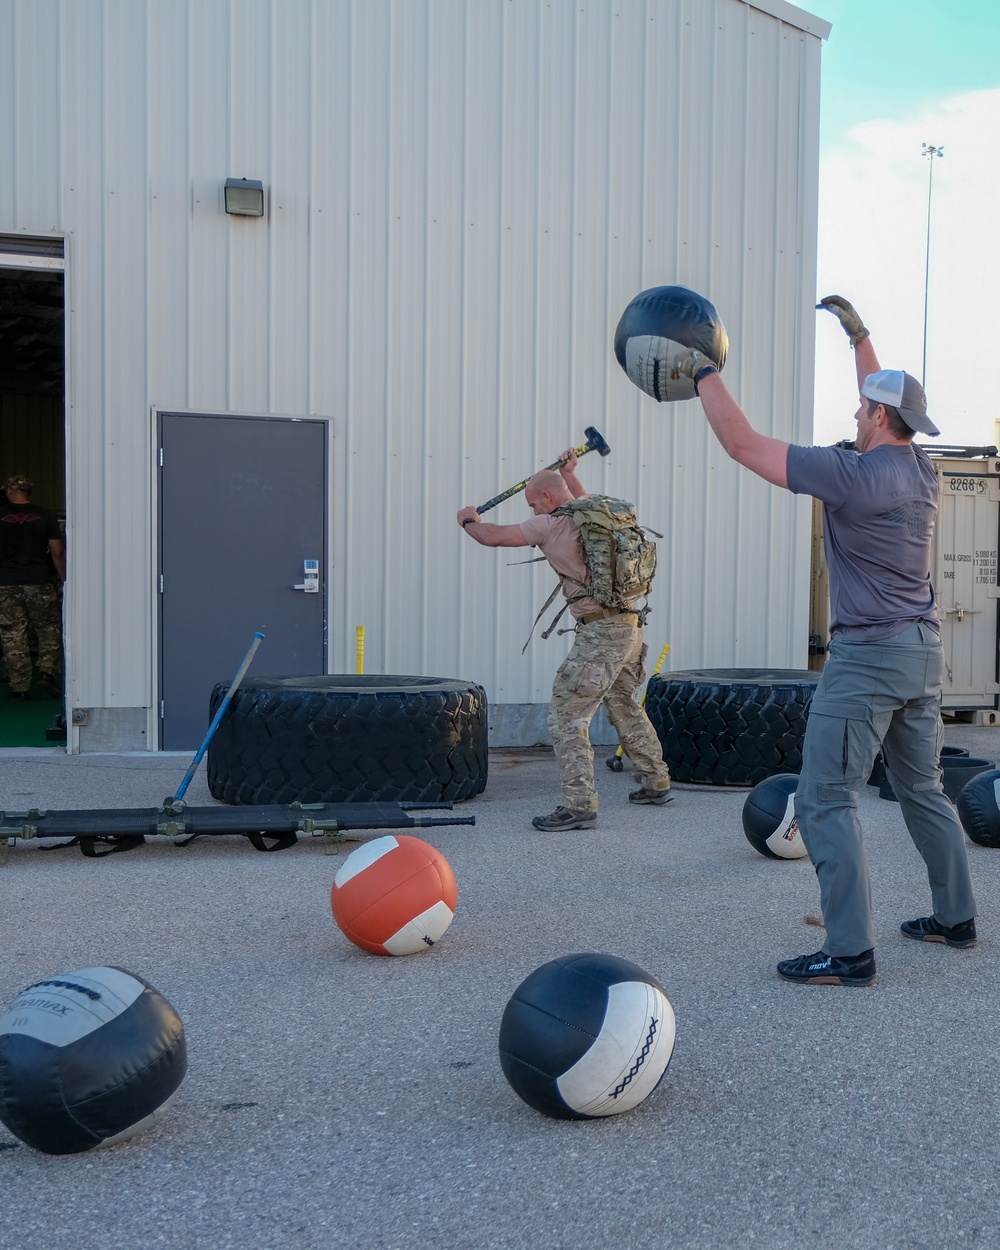 Monster Mash: Memorial Workout by the 306th Rescue Squadron for A1C William Pitsenbarger